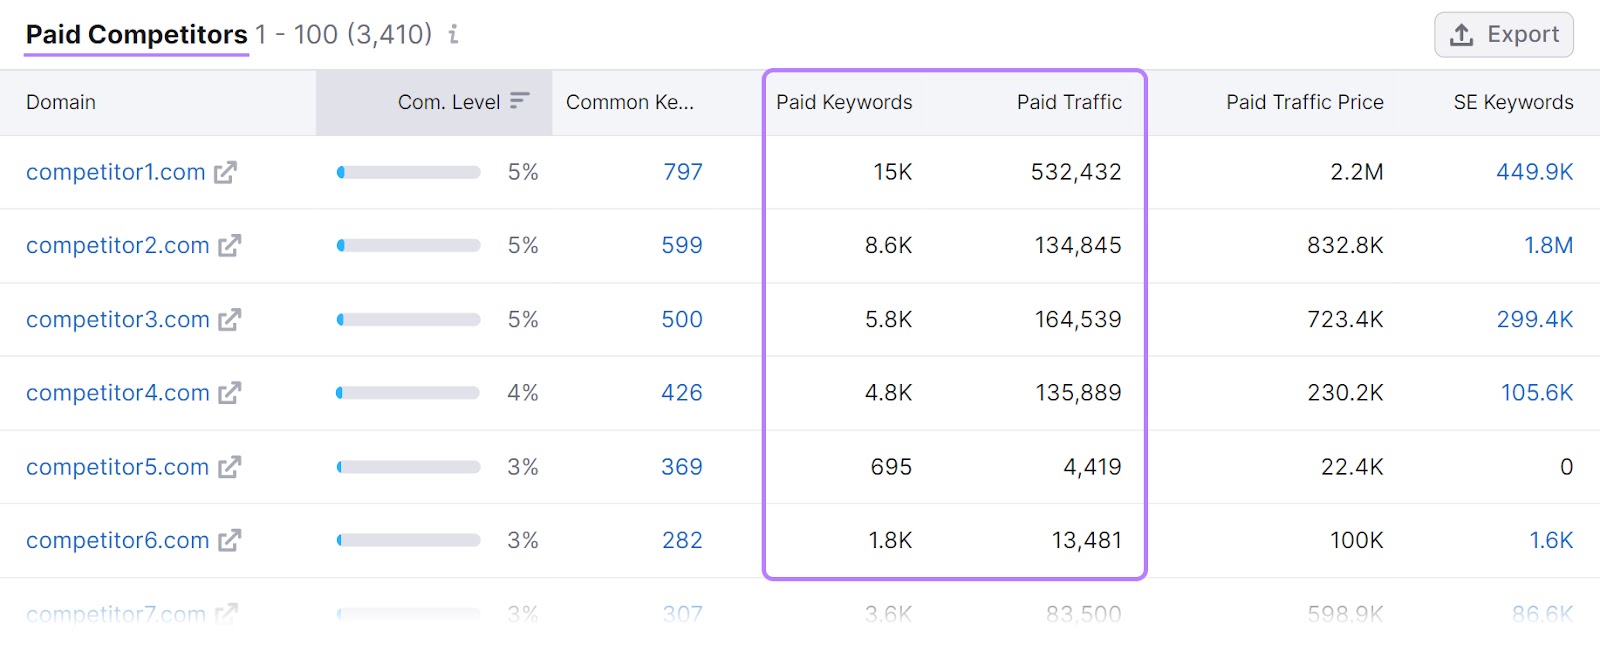 "Paid Competitors" table with "Paid Keywords" and " Paid Traffic" columns highlighted